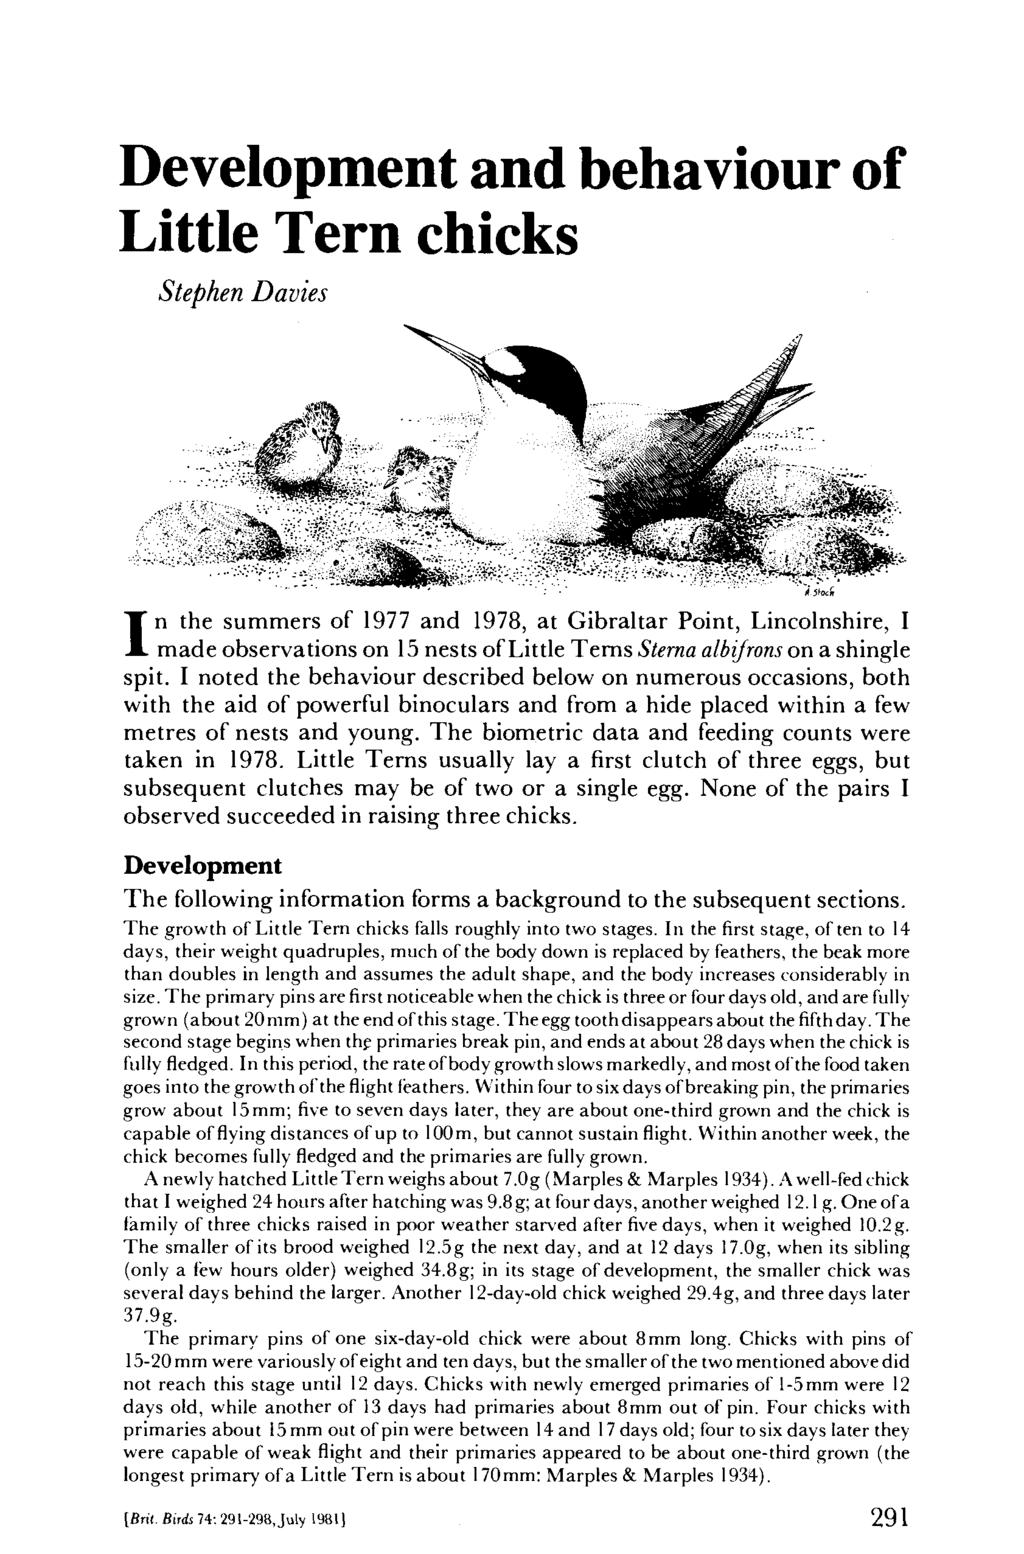 Development and behaviour of Little Tern chicks Stephen Davies In the summers of 1977 and 1978, at Gibraltar Point, Lincolnshire, I made observations on 15 nests of Little Terns Sterna albifrons on a